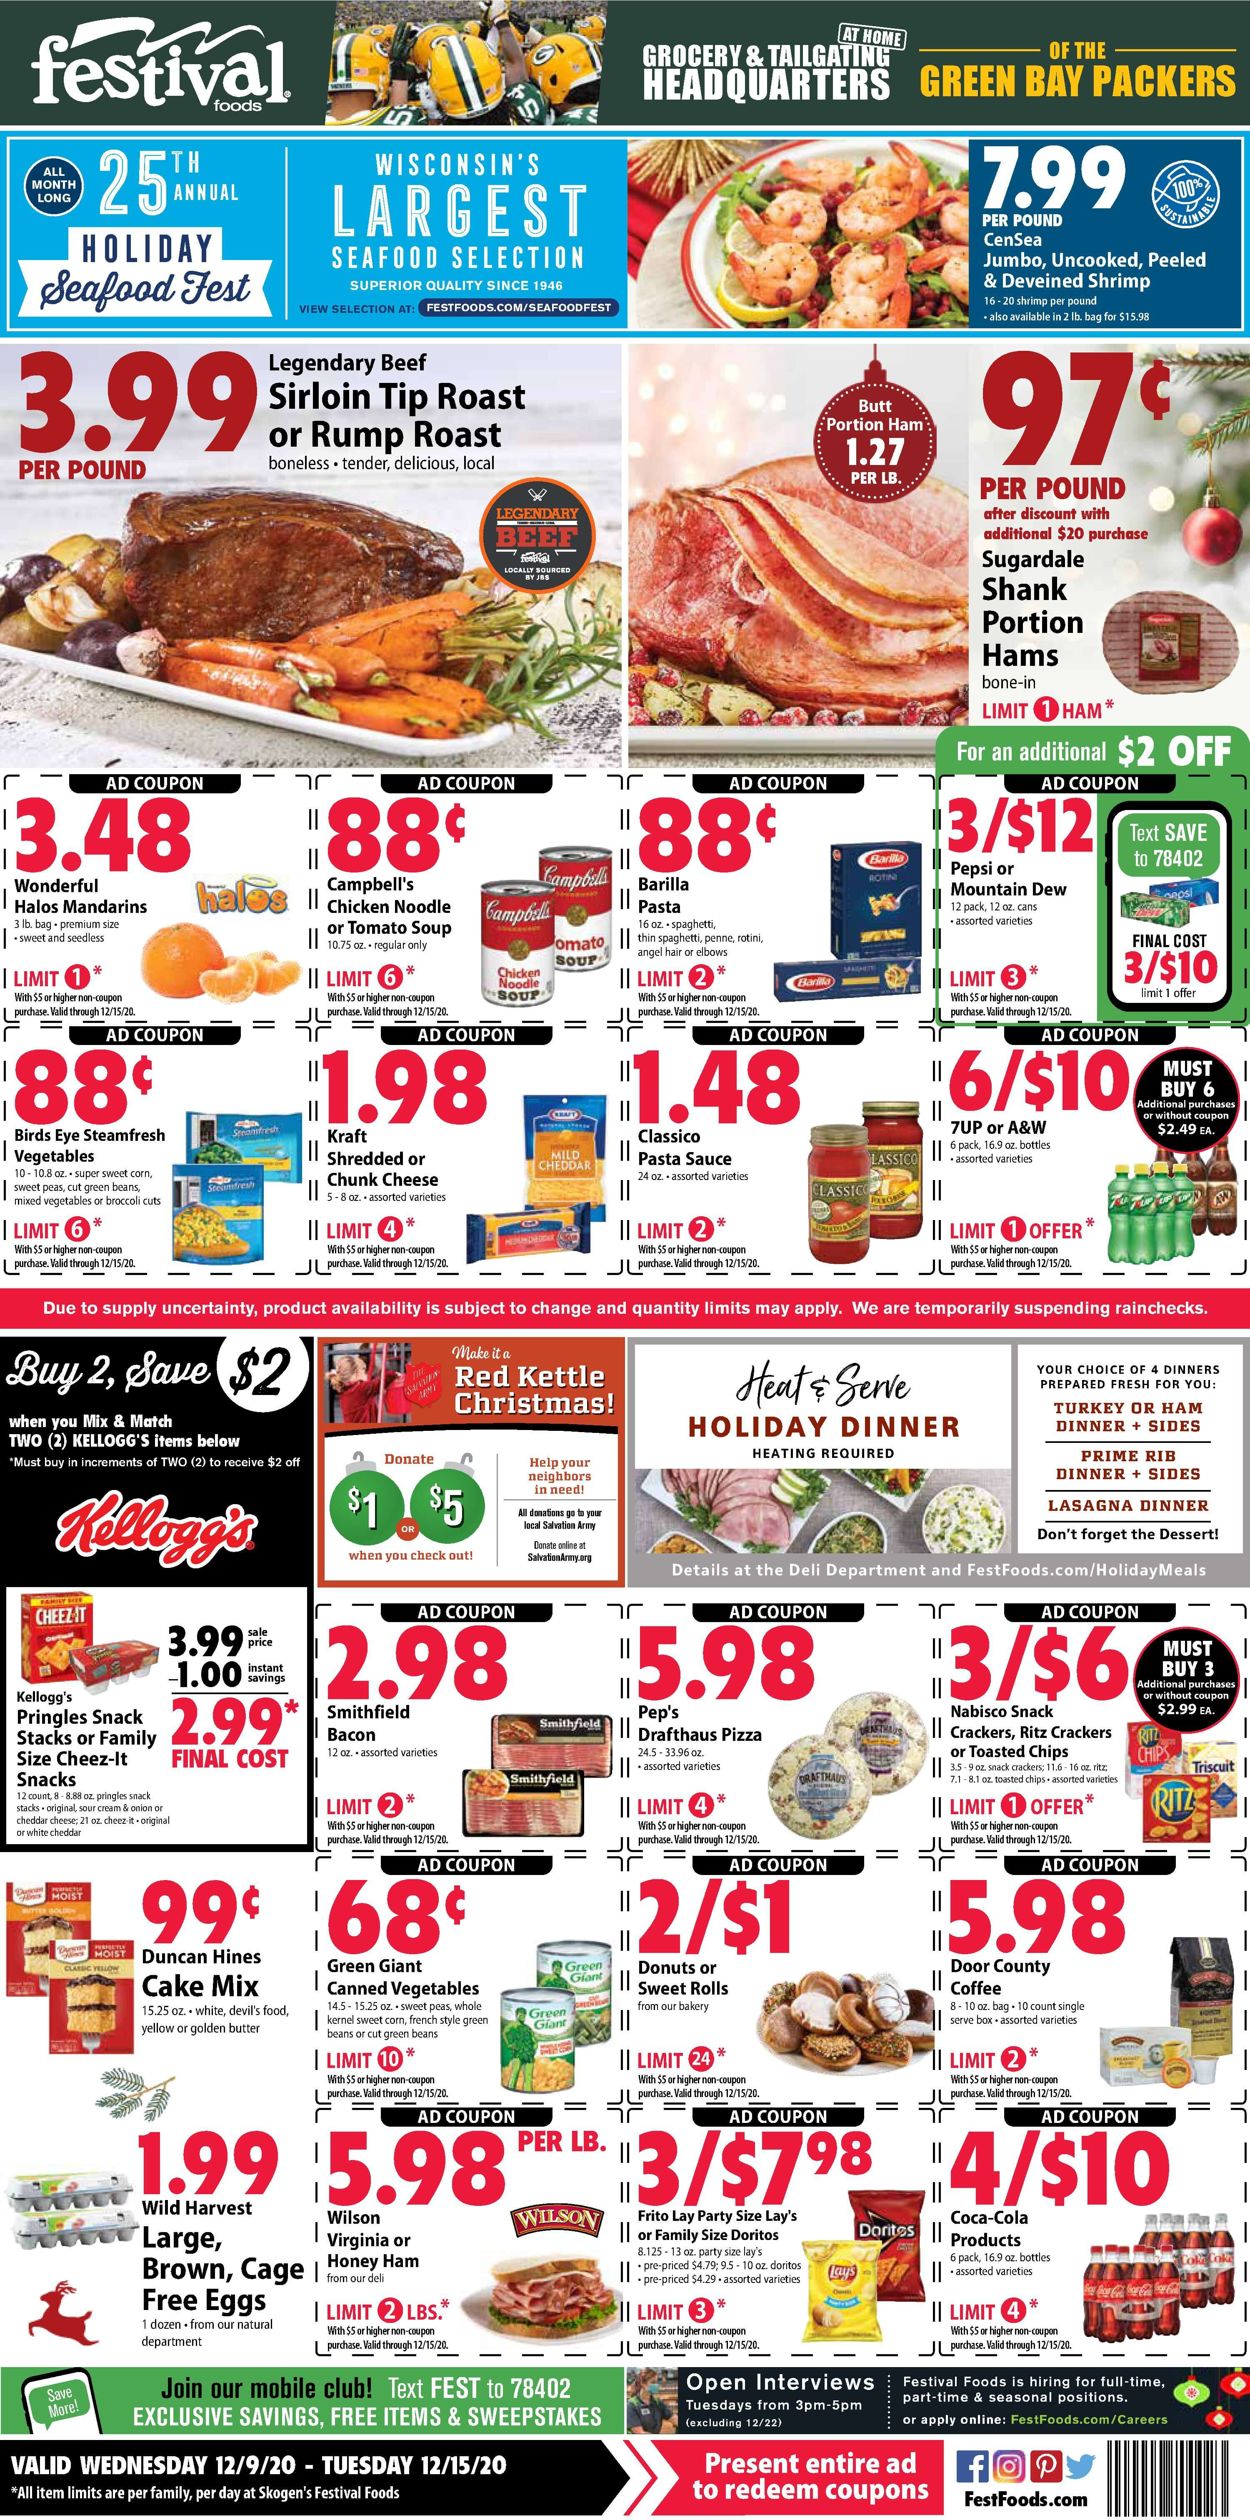 Festival Foods Current weekly ad 12/09 - 12/15/2020 - frequent-ads.com